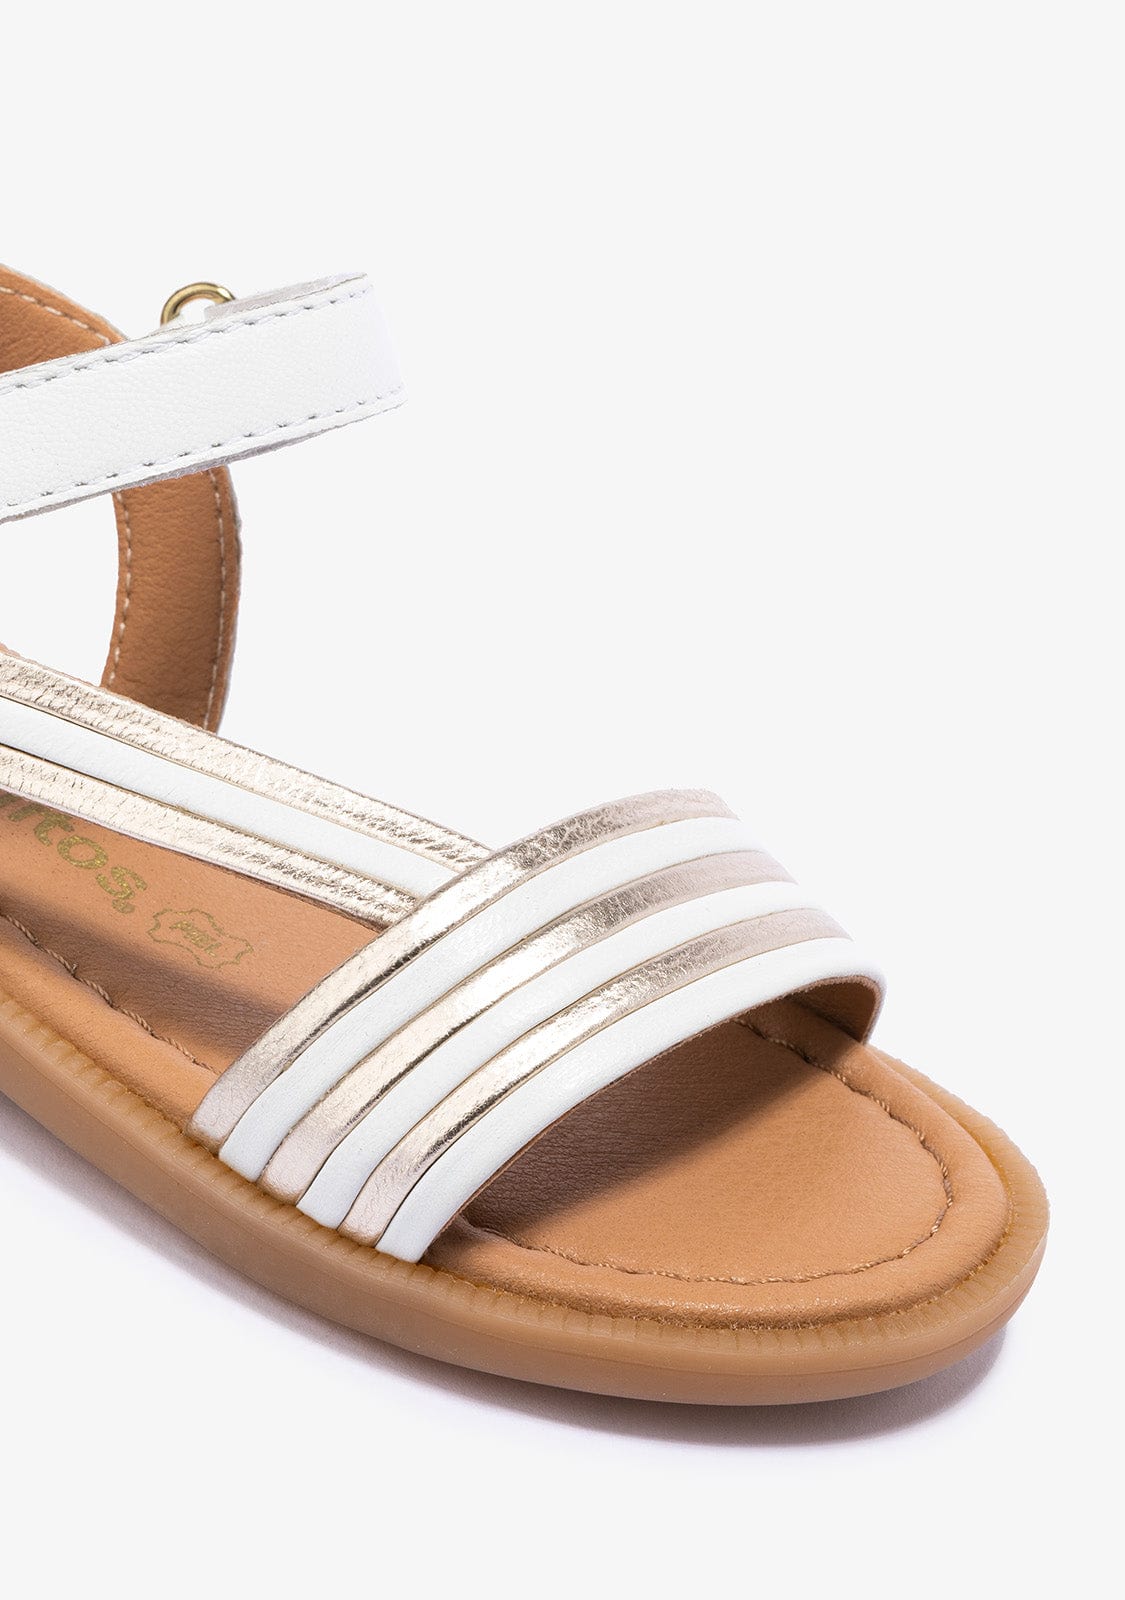 CONGUITOS Shoes Girl's White Gold Adherent Strip Sandals Napa